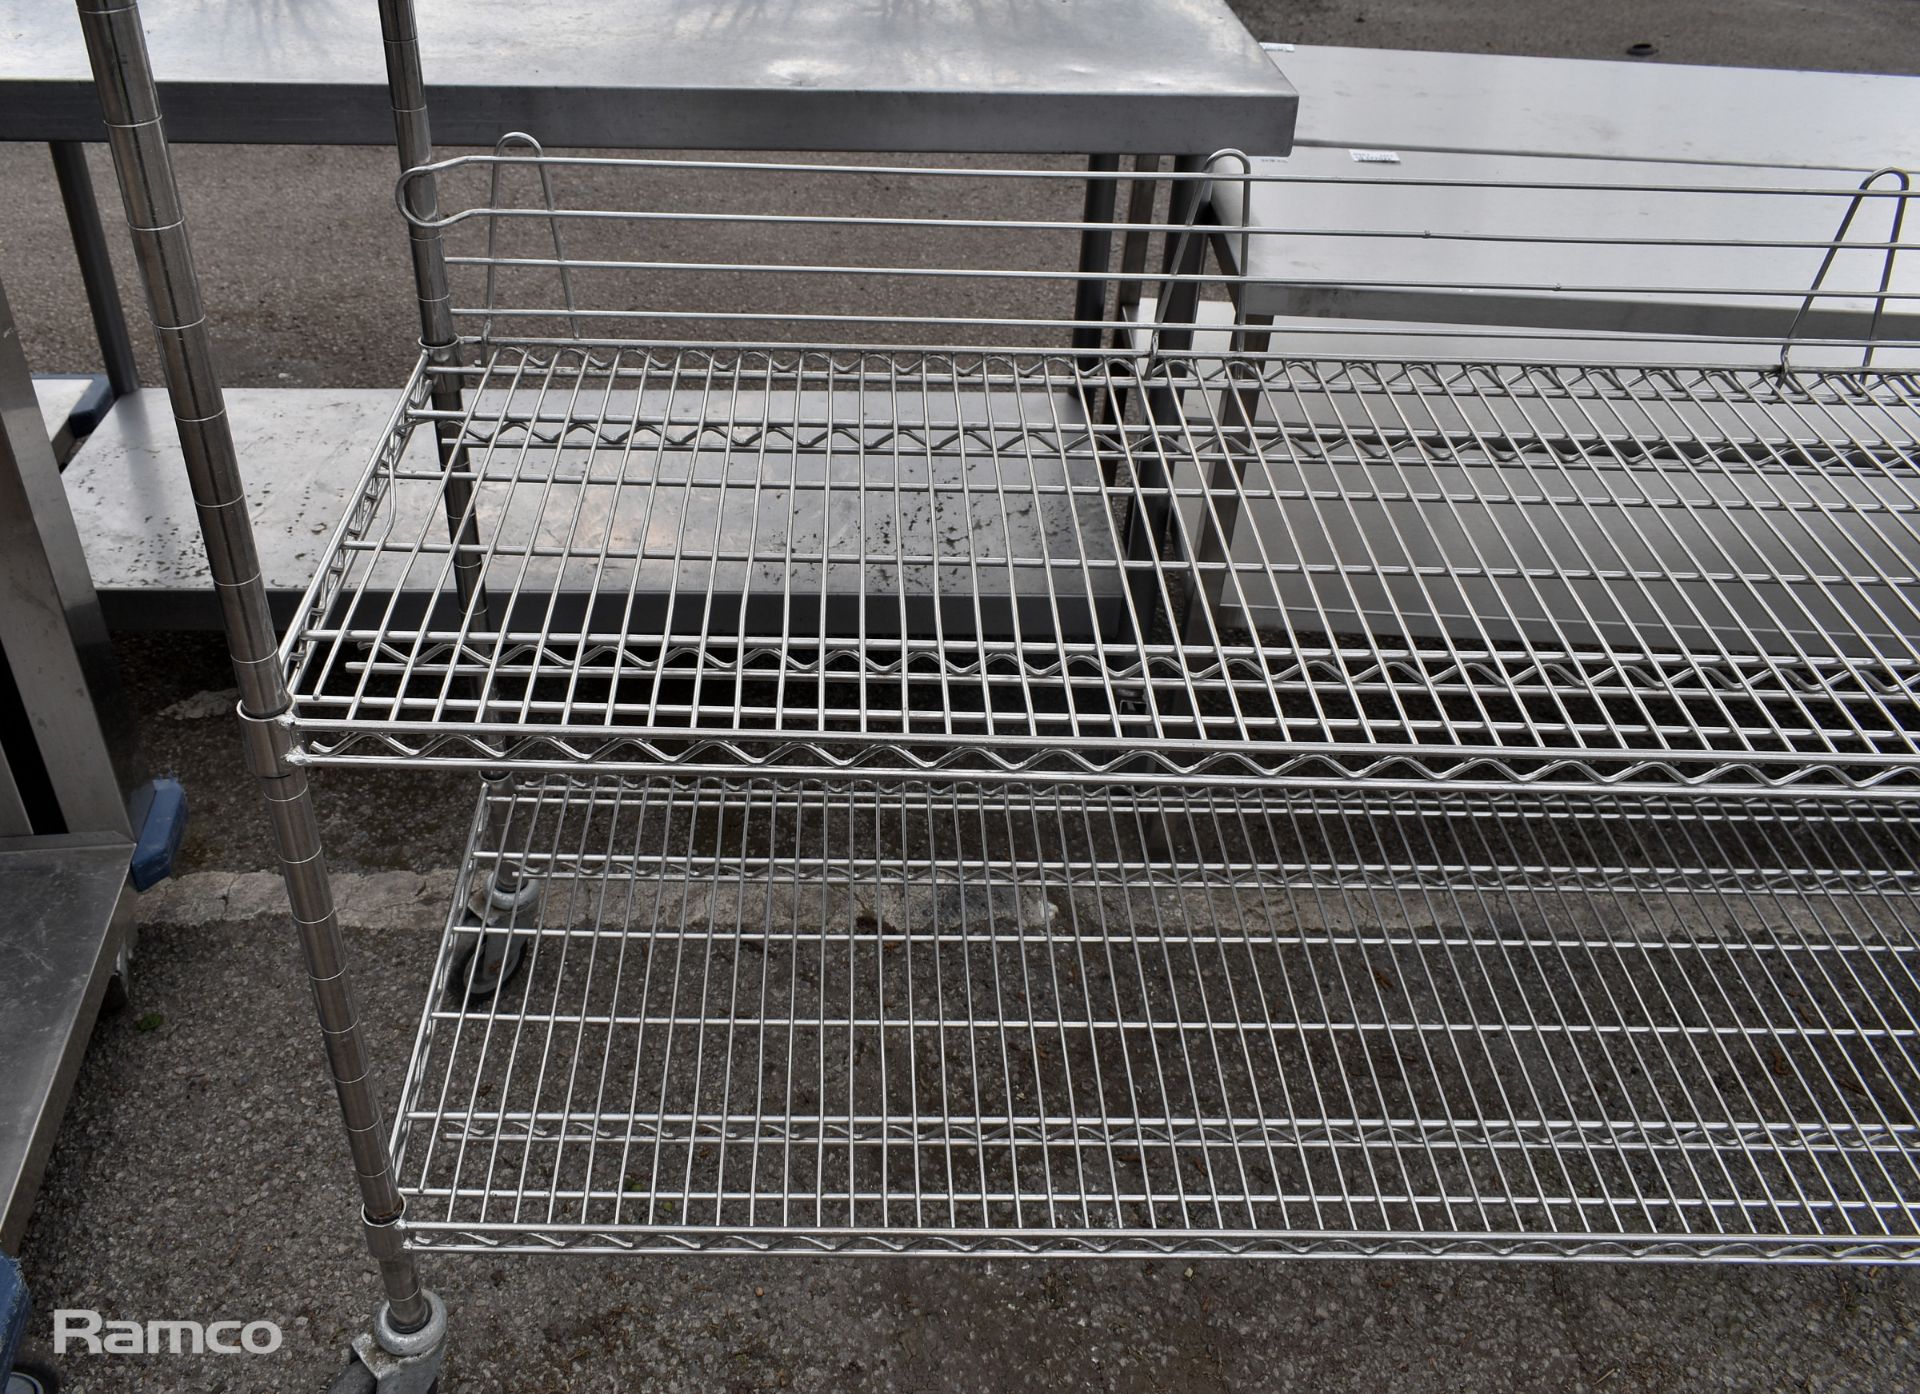 Stainless steel 4-tier storage shelves on castors - W 1750 x D 550 x H 1800mm - Image 3 of 4